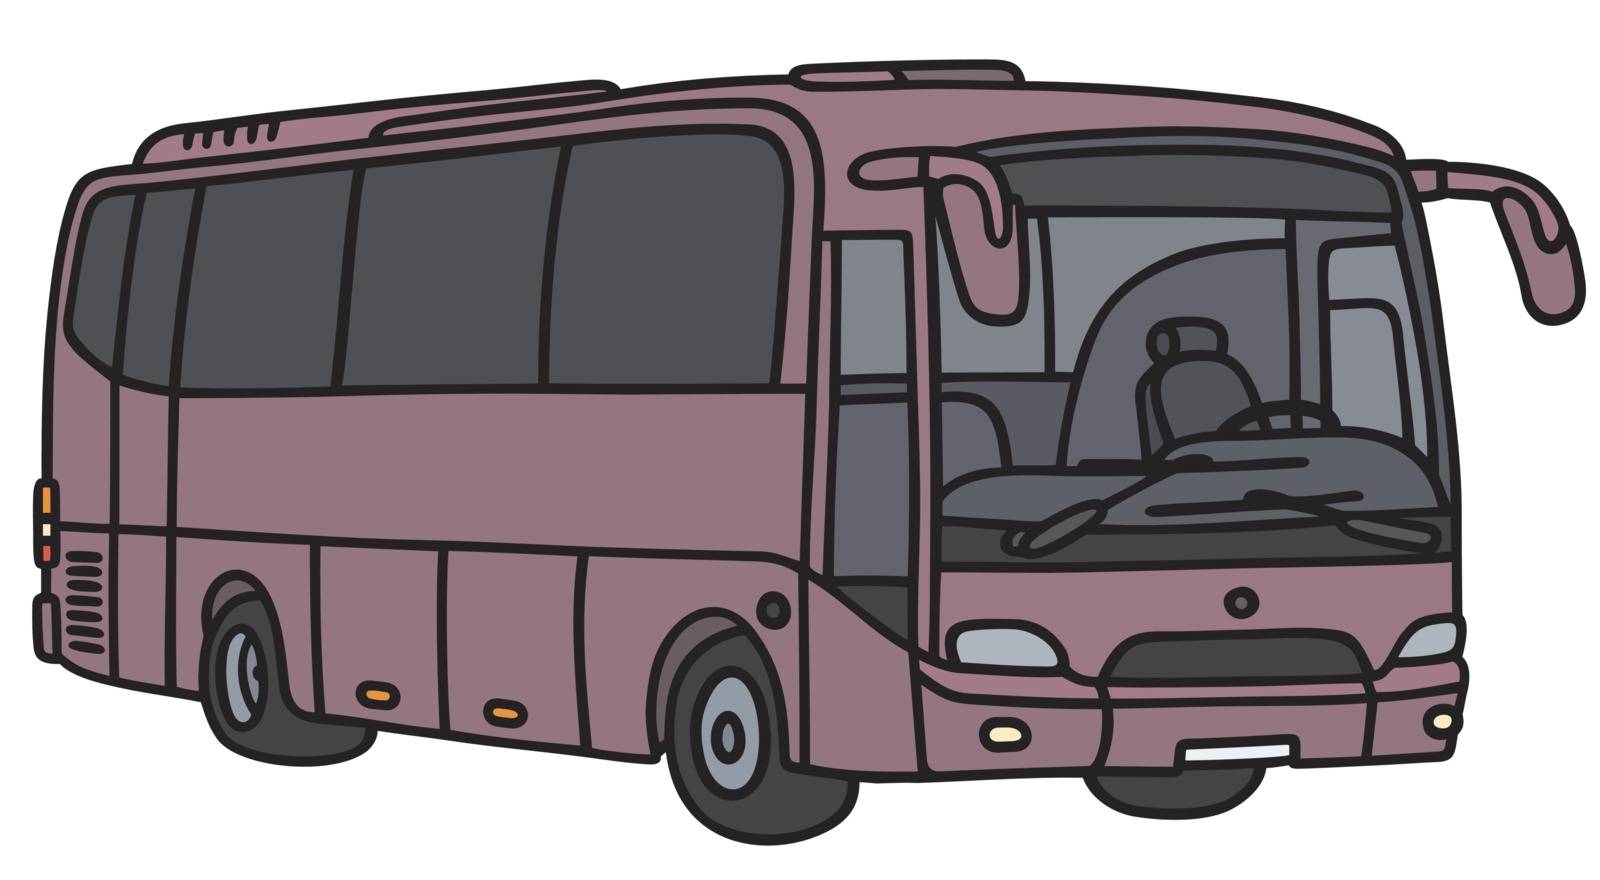 Hand drawing of a violet bus - not a real model